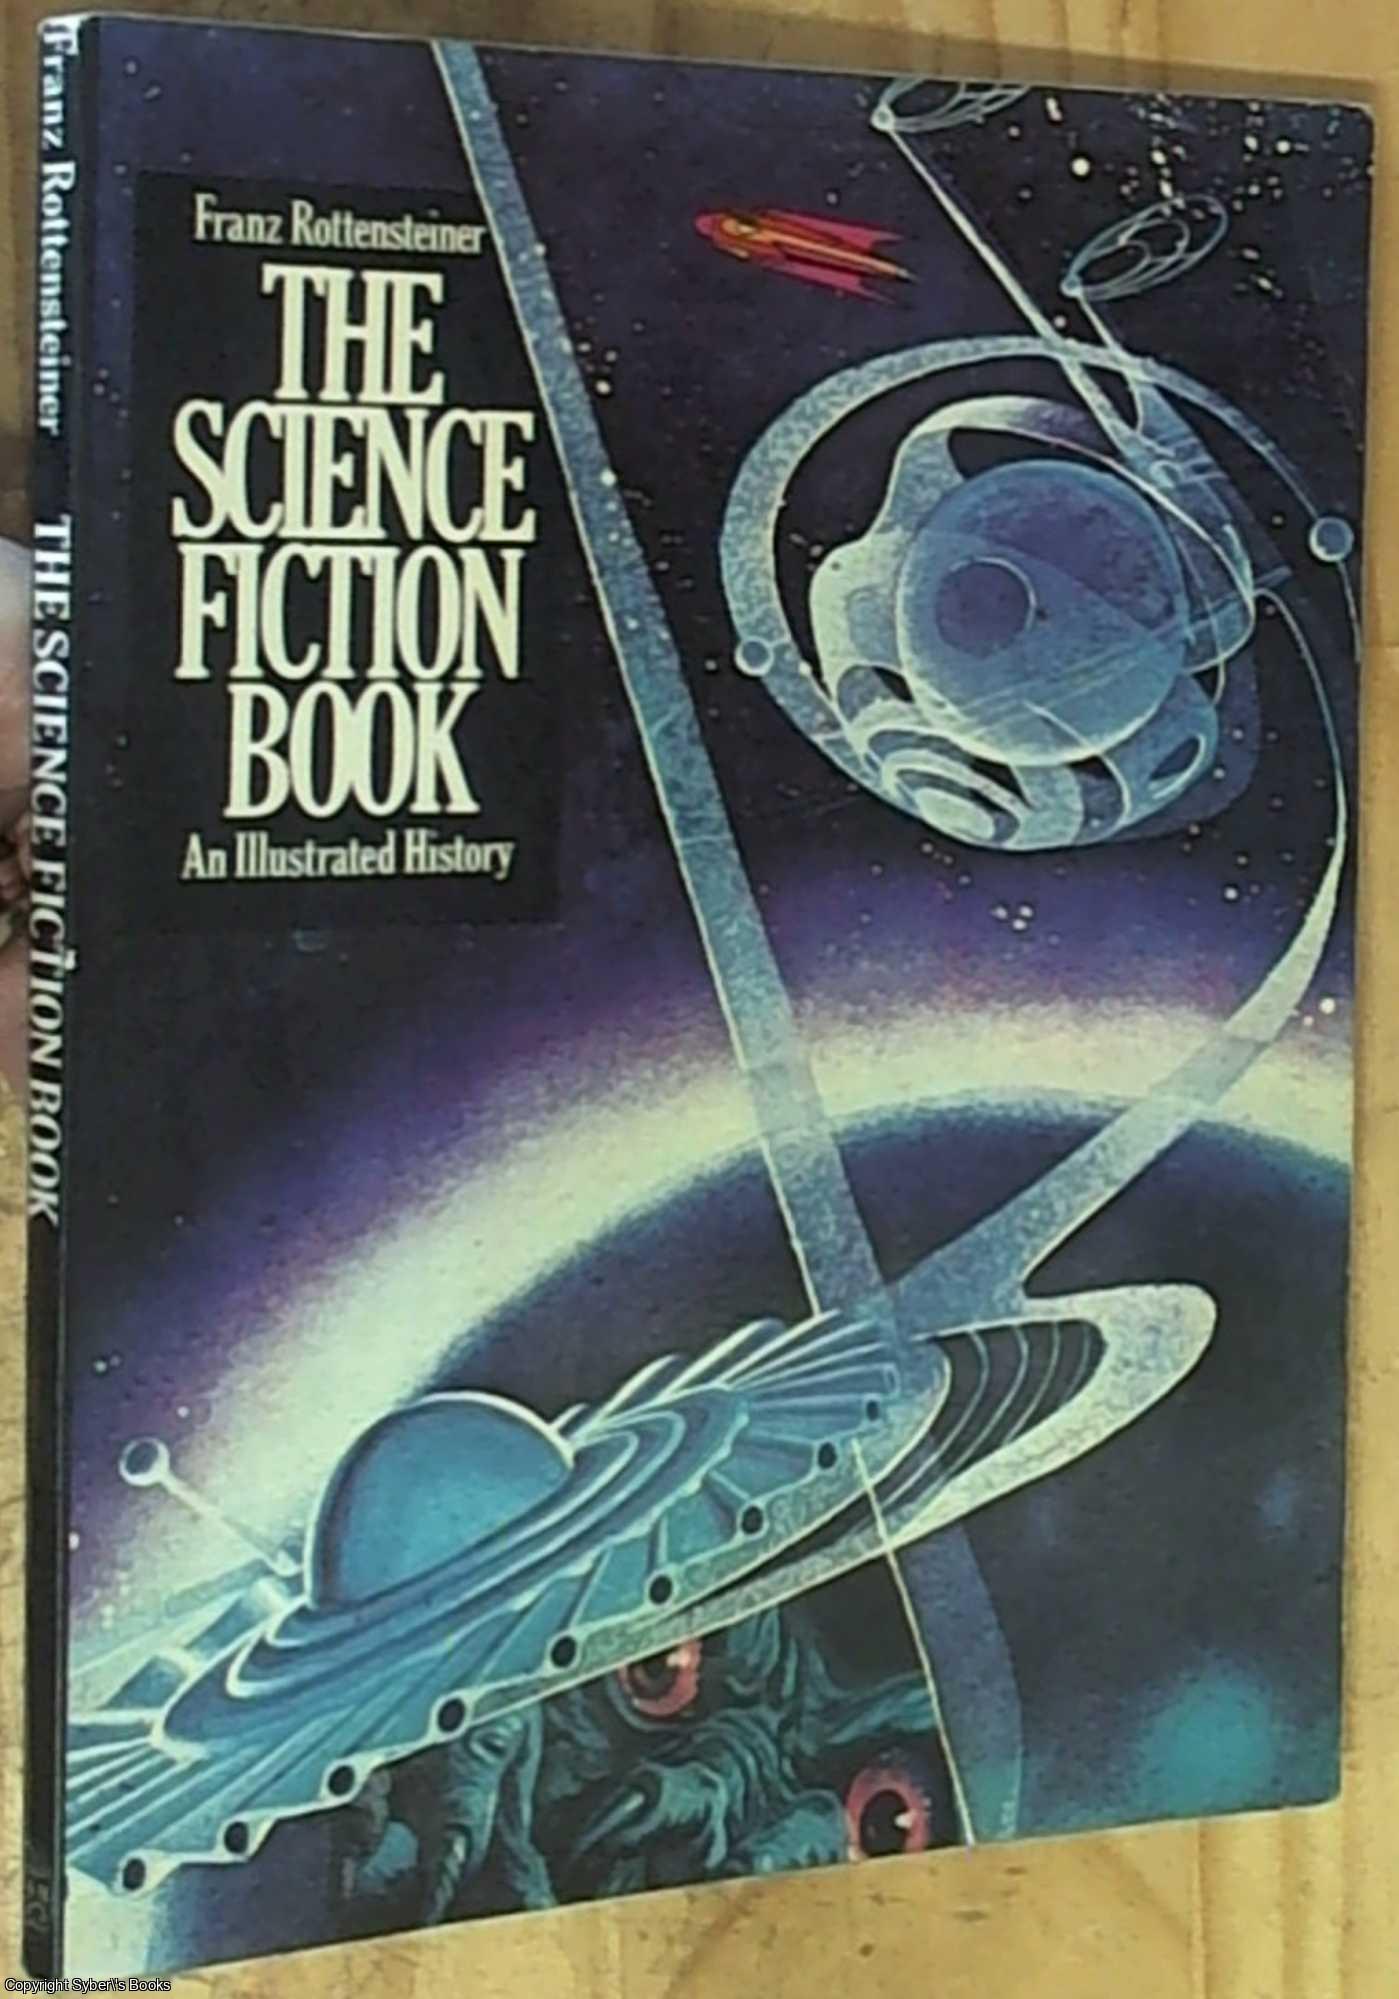 Rottensteiner, Franz - The Science Fiction Book: An Illustrated History